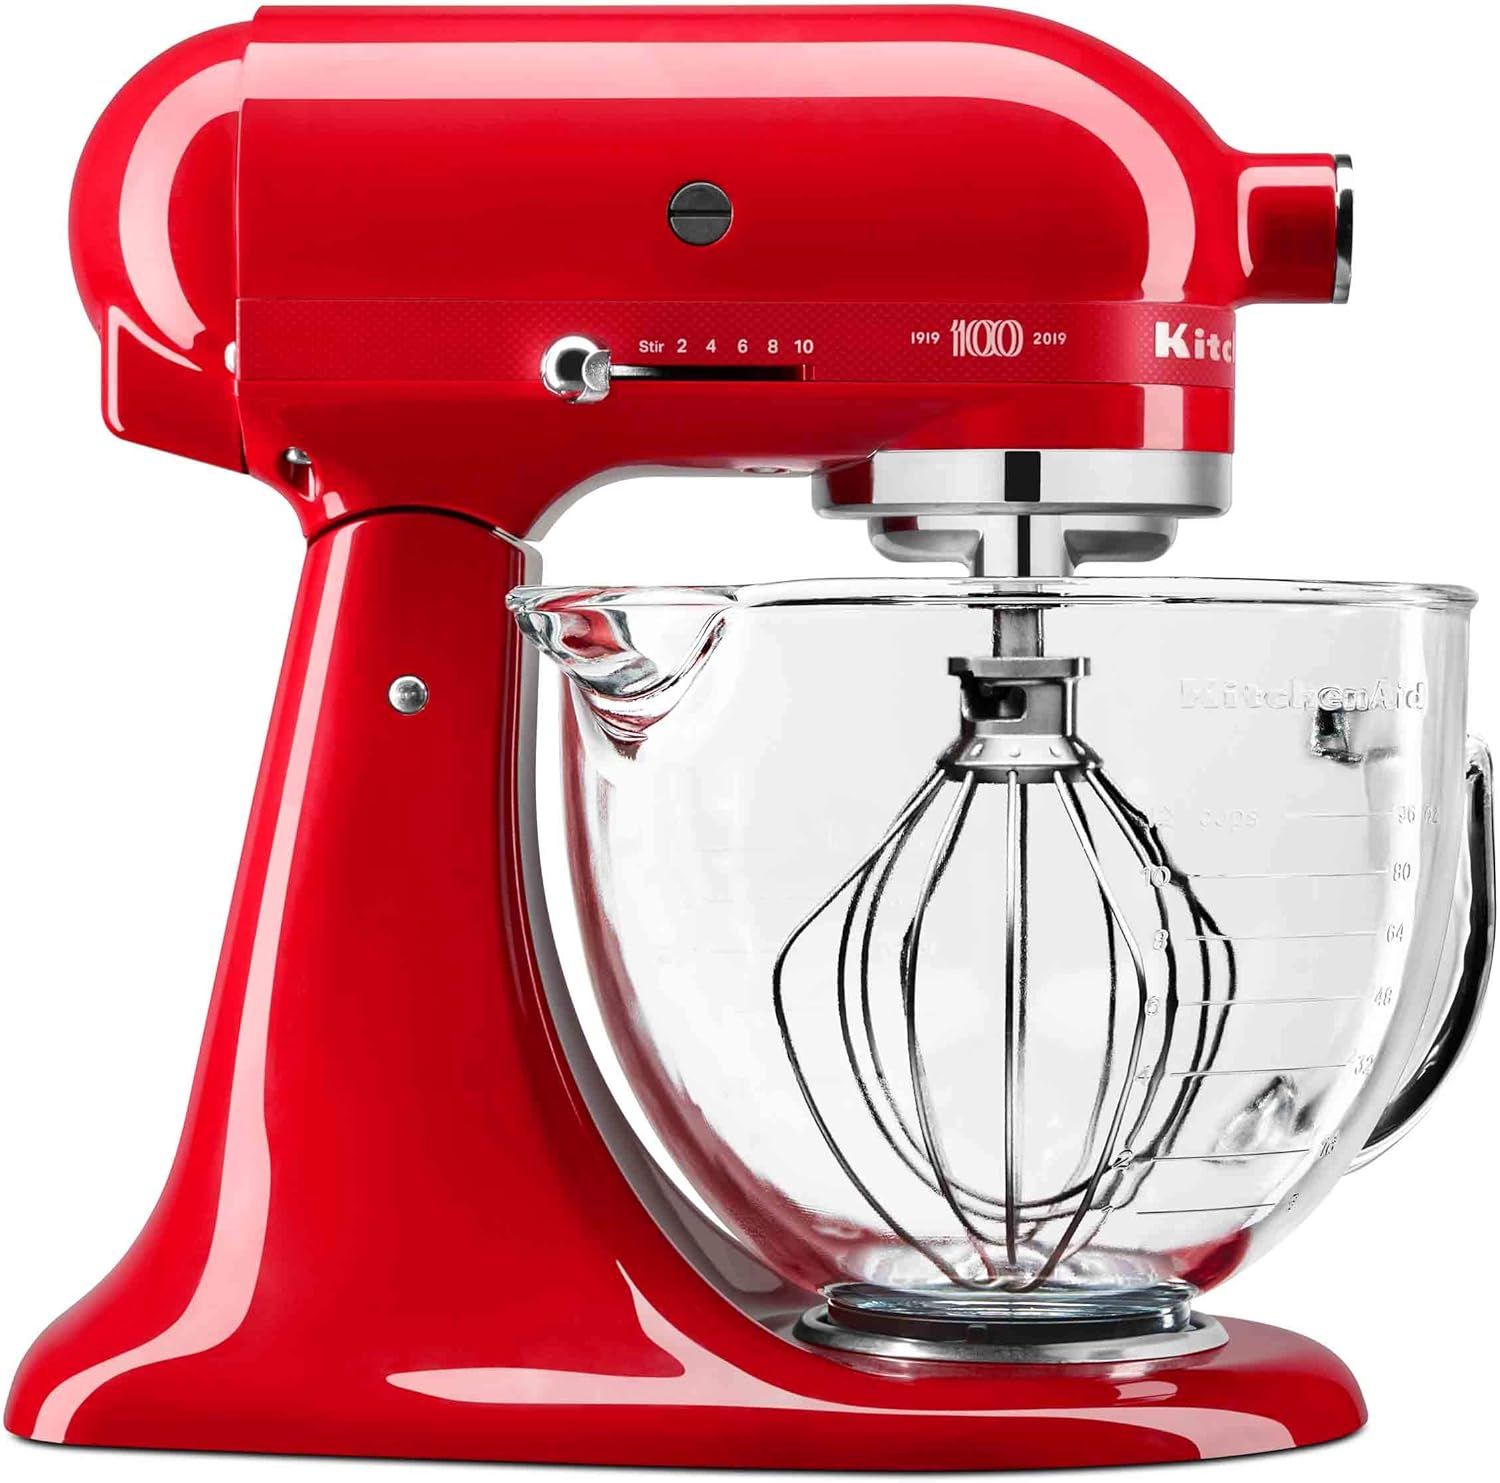 KitchenAid KSM180QHGSD Queen of Hearts Stand Mixer, 5 Qt, Passion Red | Amazon (US)